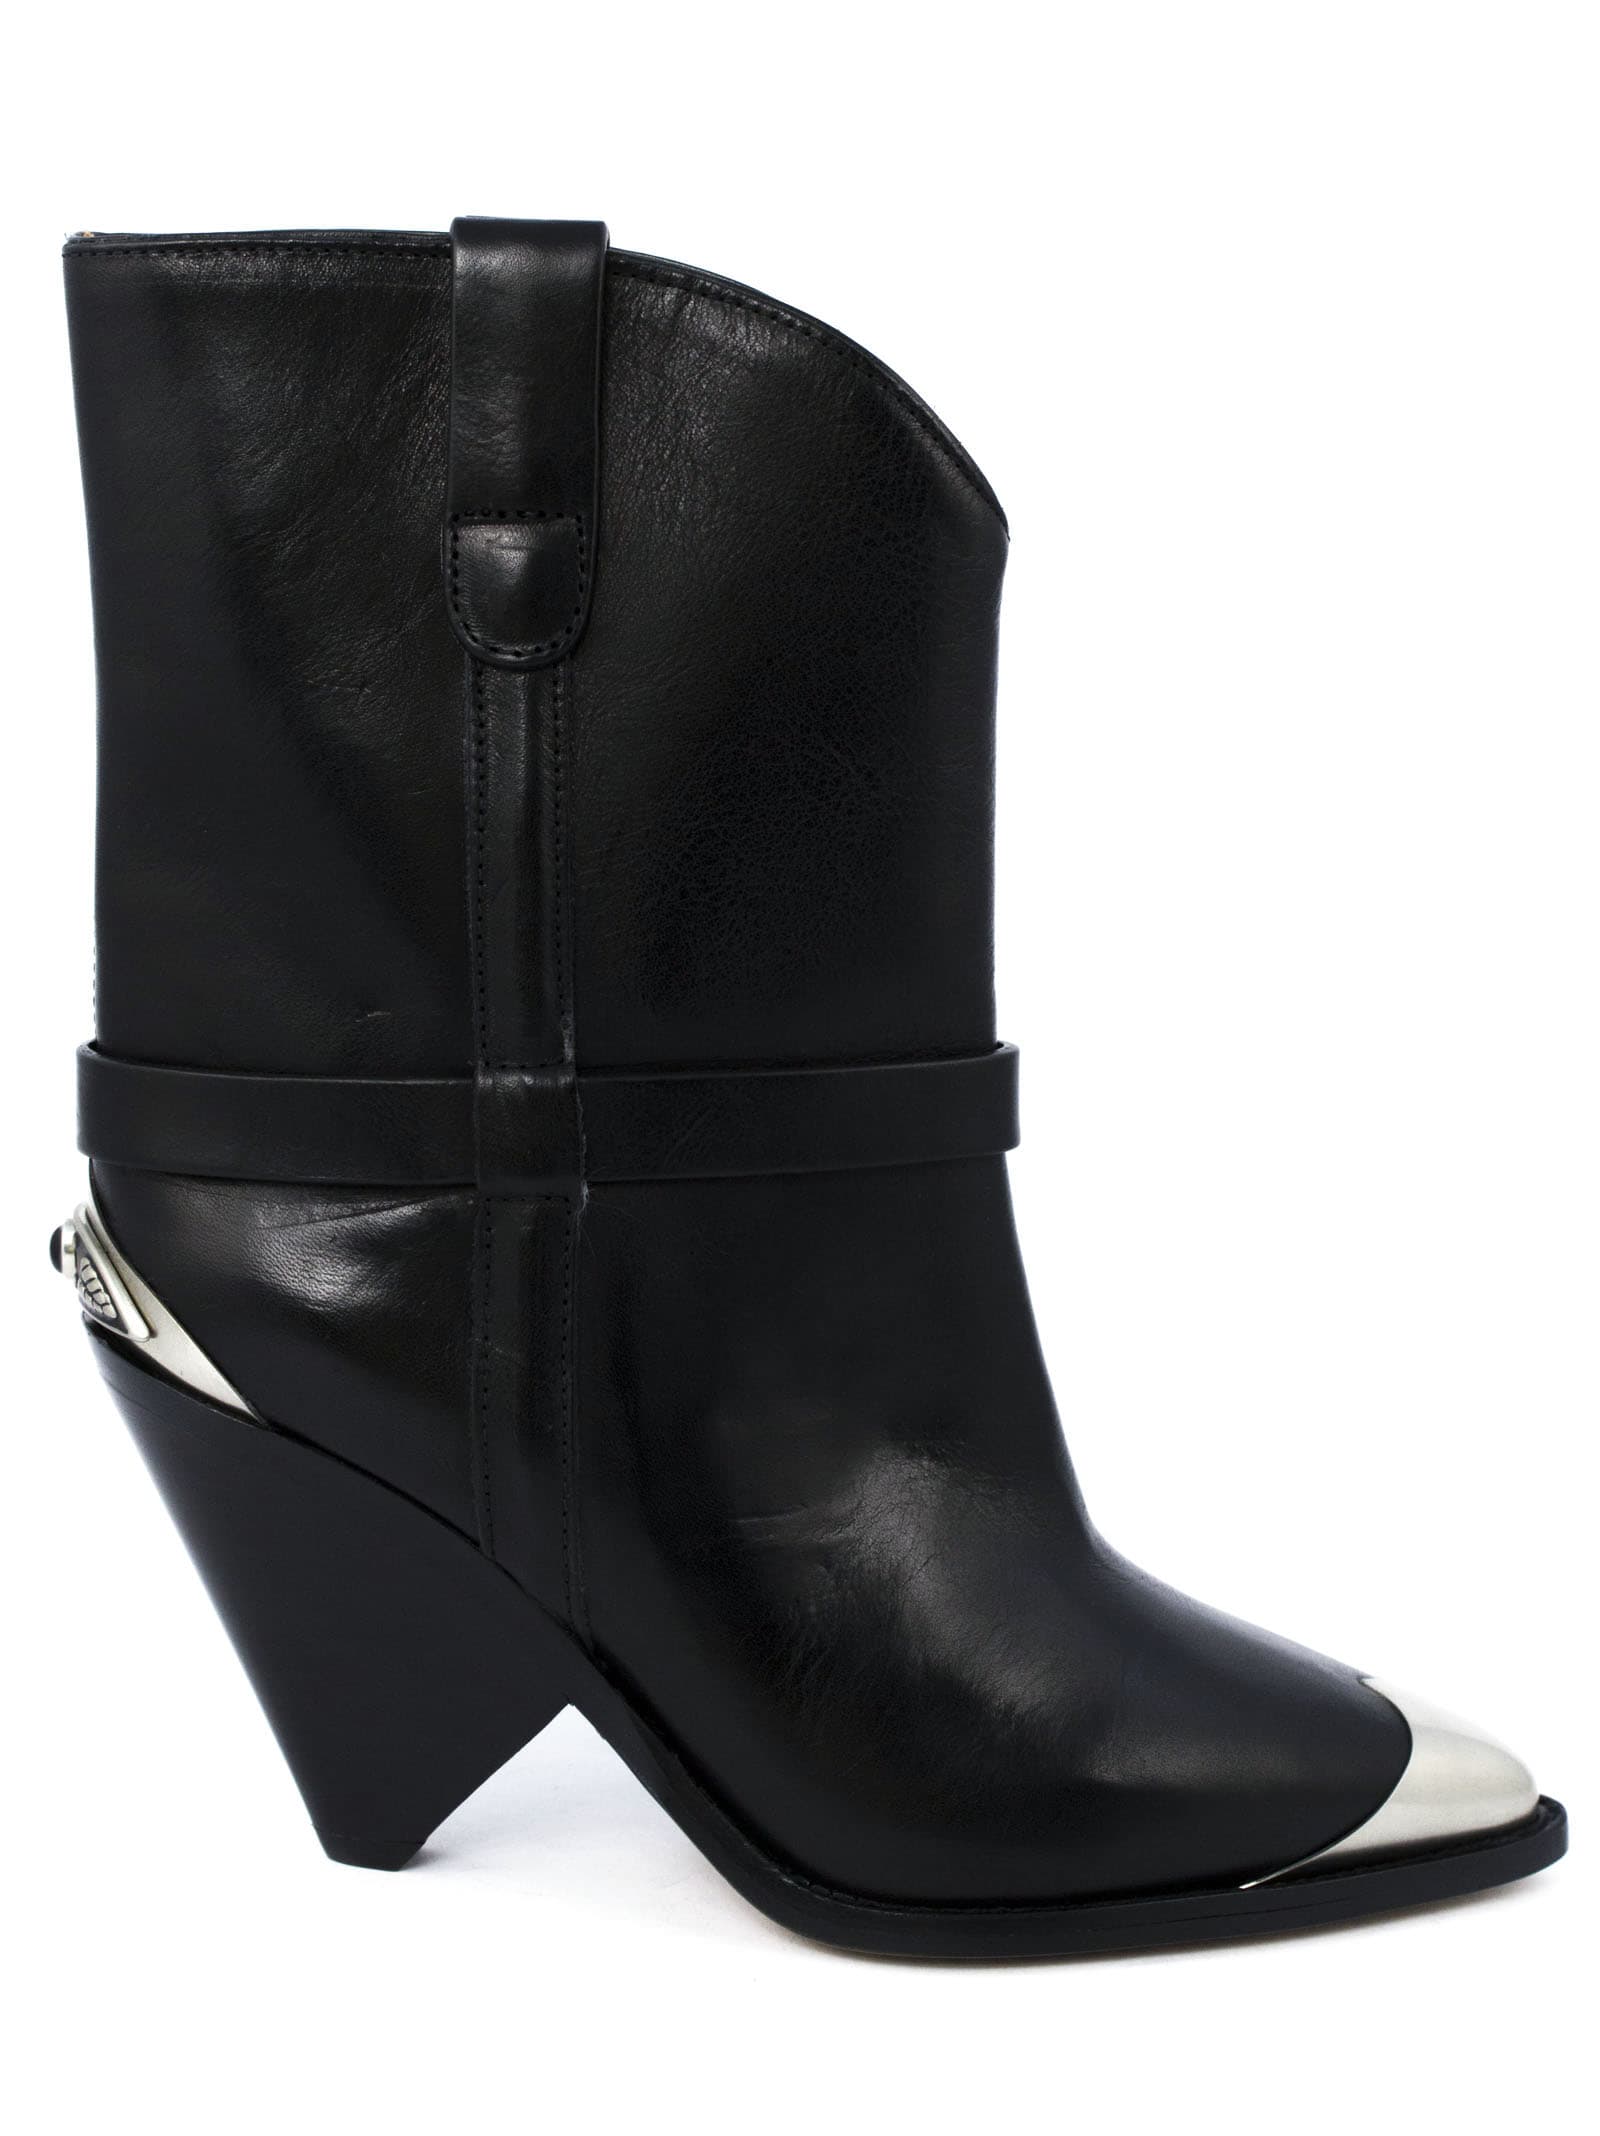 Isabel Marant Lamsy High Heels Ankle Boots In Black Leather | ModeSens